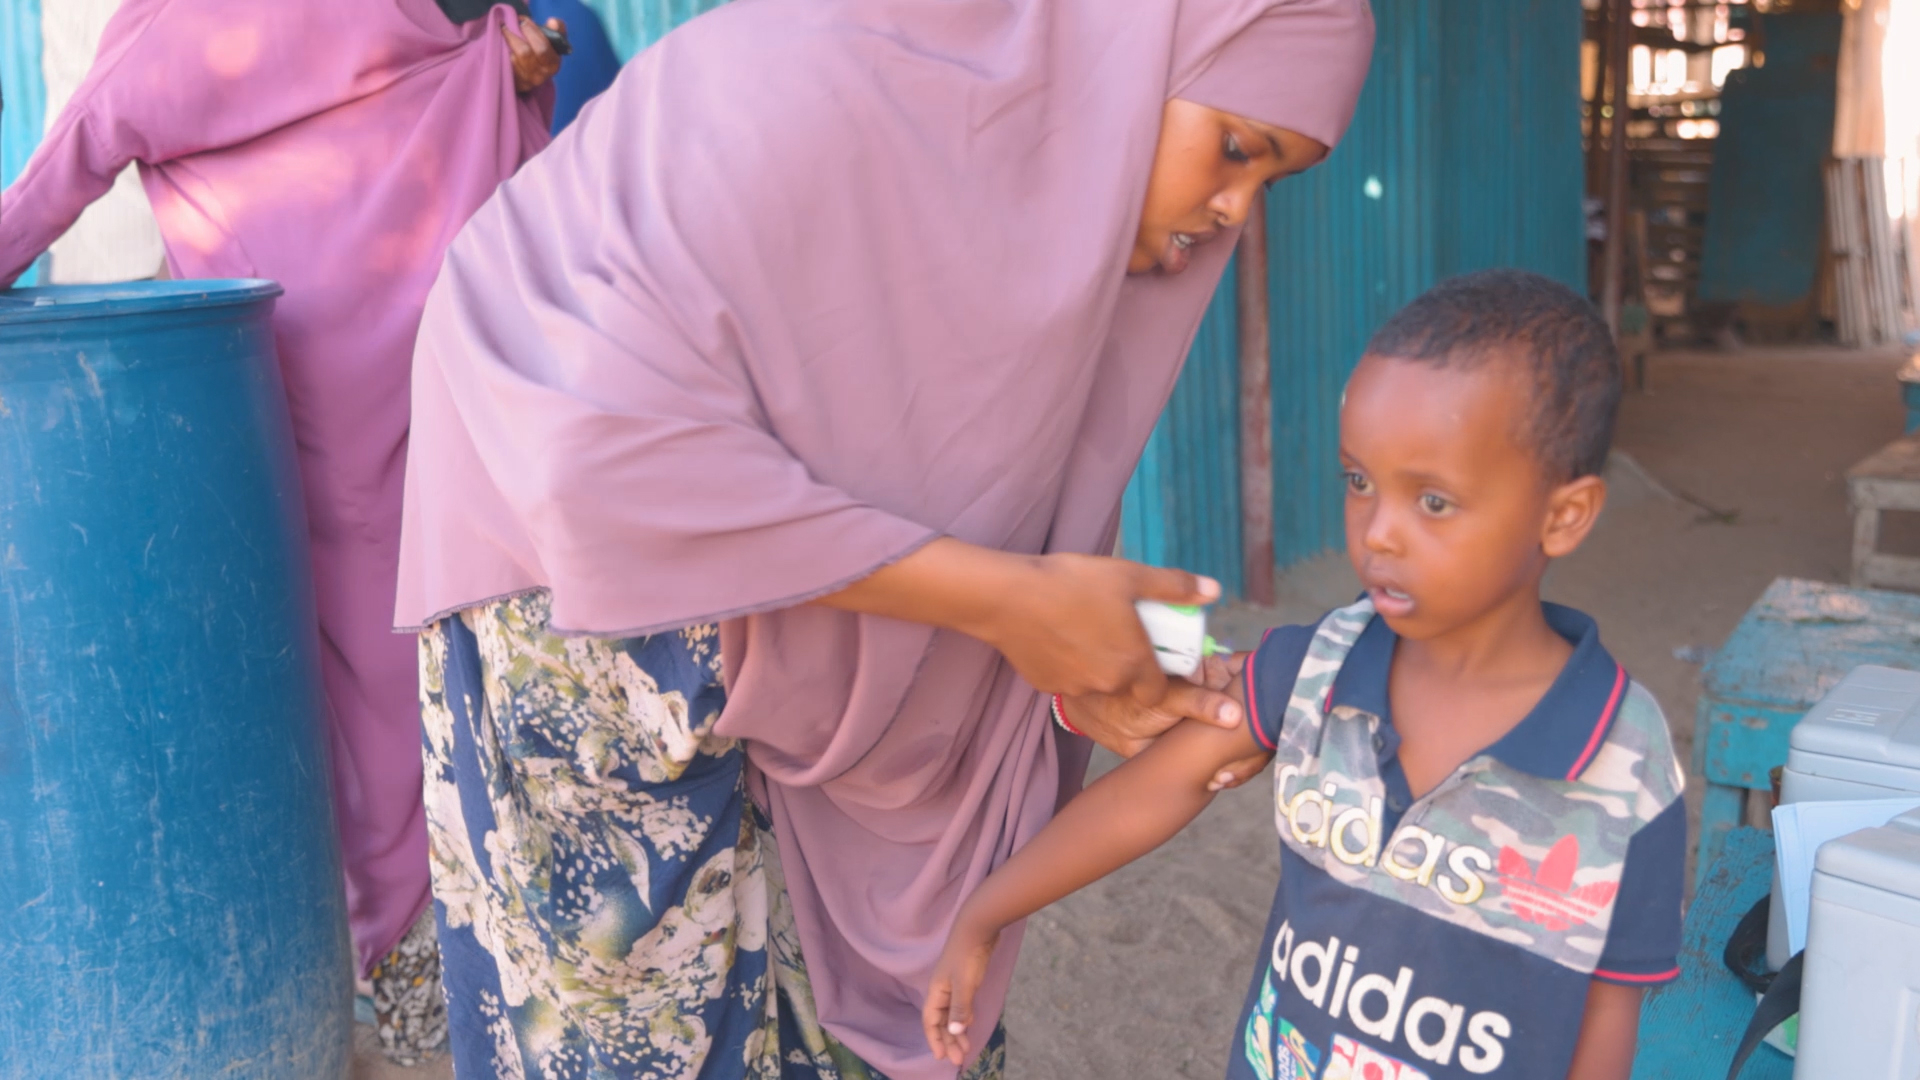 In 2021, PharmaJet experts conducted training in Mogadishu alongside UNICEF, WHO, and local health authorities who then, over the following 2 weeks cascaded that training to over 200 additional healthcare workers. This video shows both the healthcare provider and patient experience during the Polio Immunization Campaign that immunized 110,000 children.